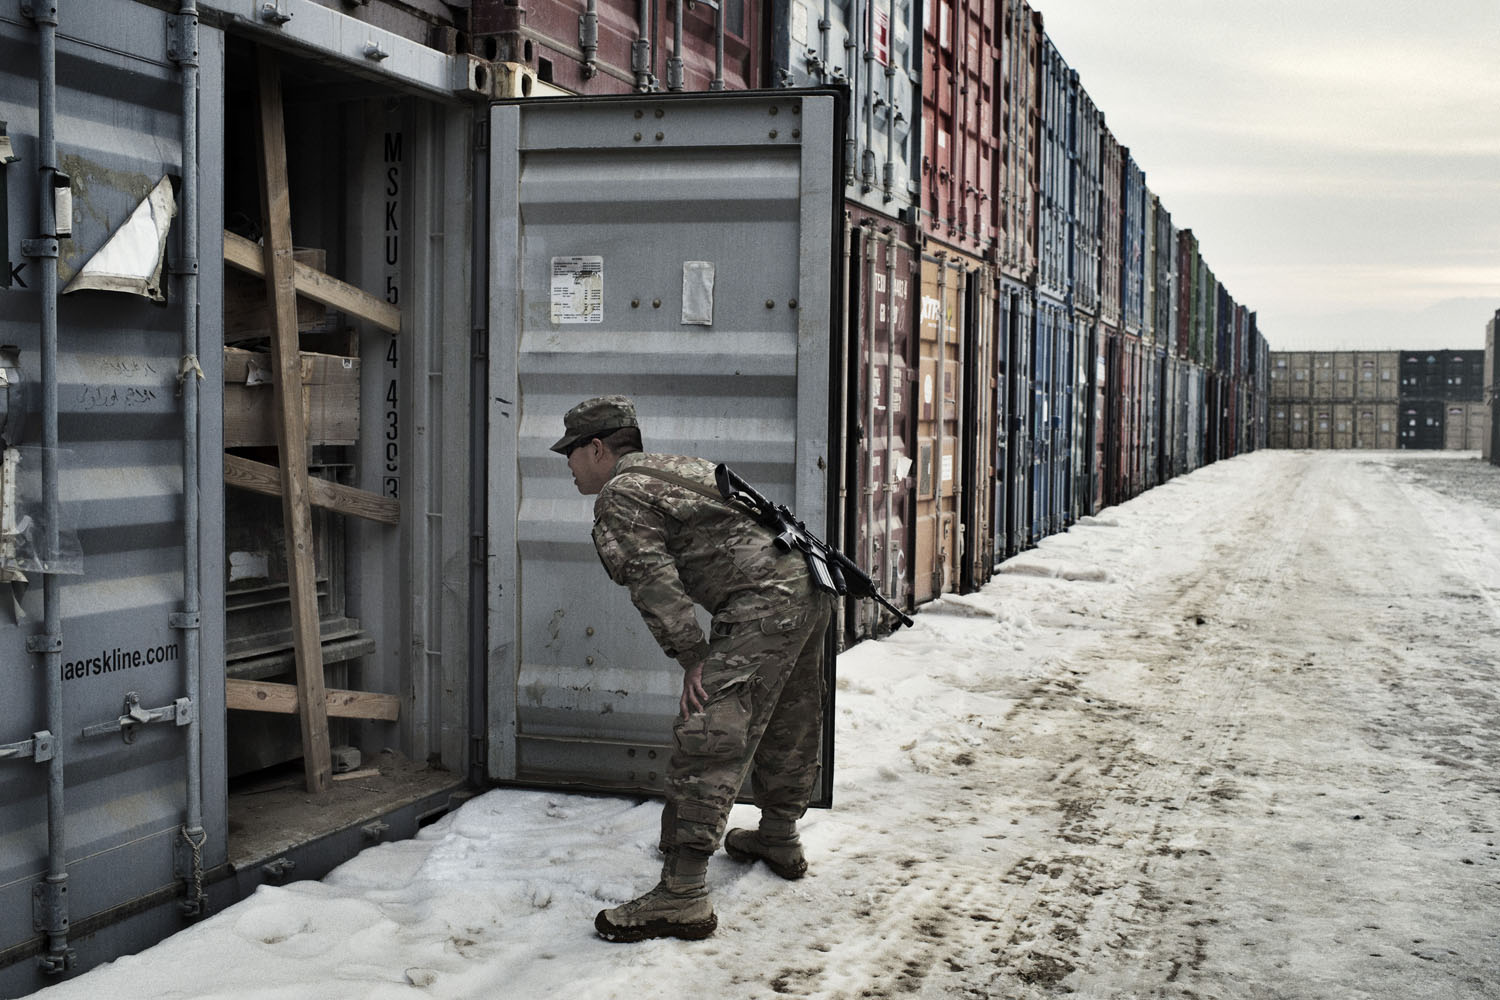 Bagram Afghanistan January 28 2013 Frst Lieut. Henry Chan of the 18th Combat Sustainment Support Battalion opens containers to find out what is inside at a container yard on Bagram Airbase in Afghanistan. With most U.S. forces set to depart Afghanistan by the end of 2014, retrograde, the military’s term for the removal of combat equipment from the country, has become a top mission.